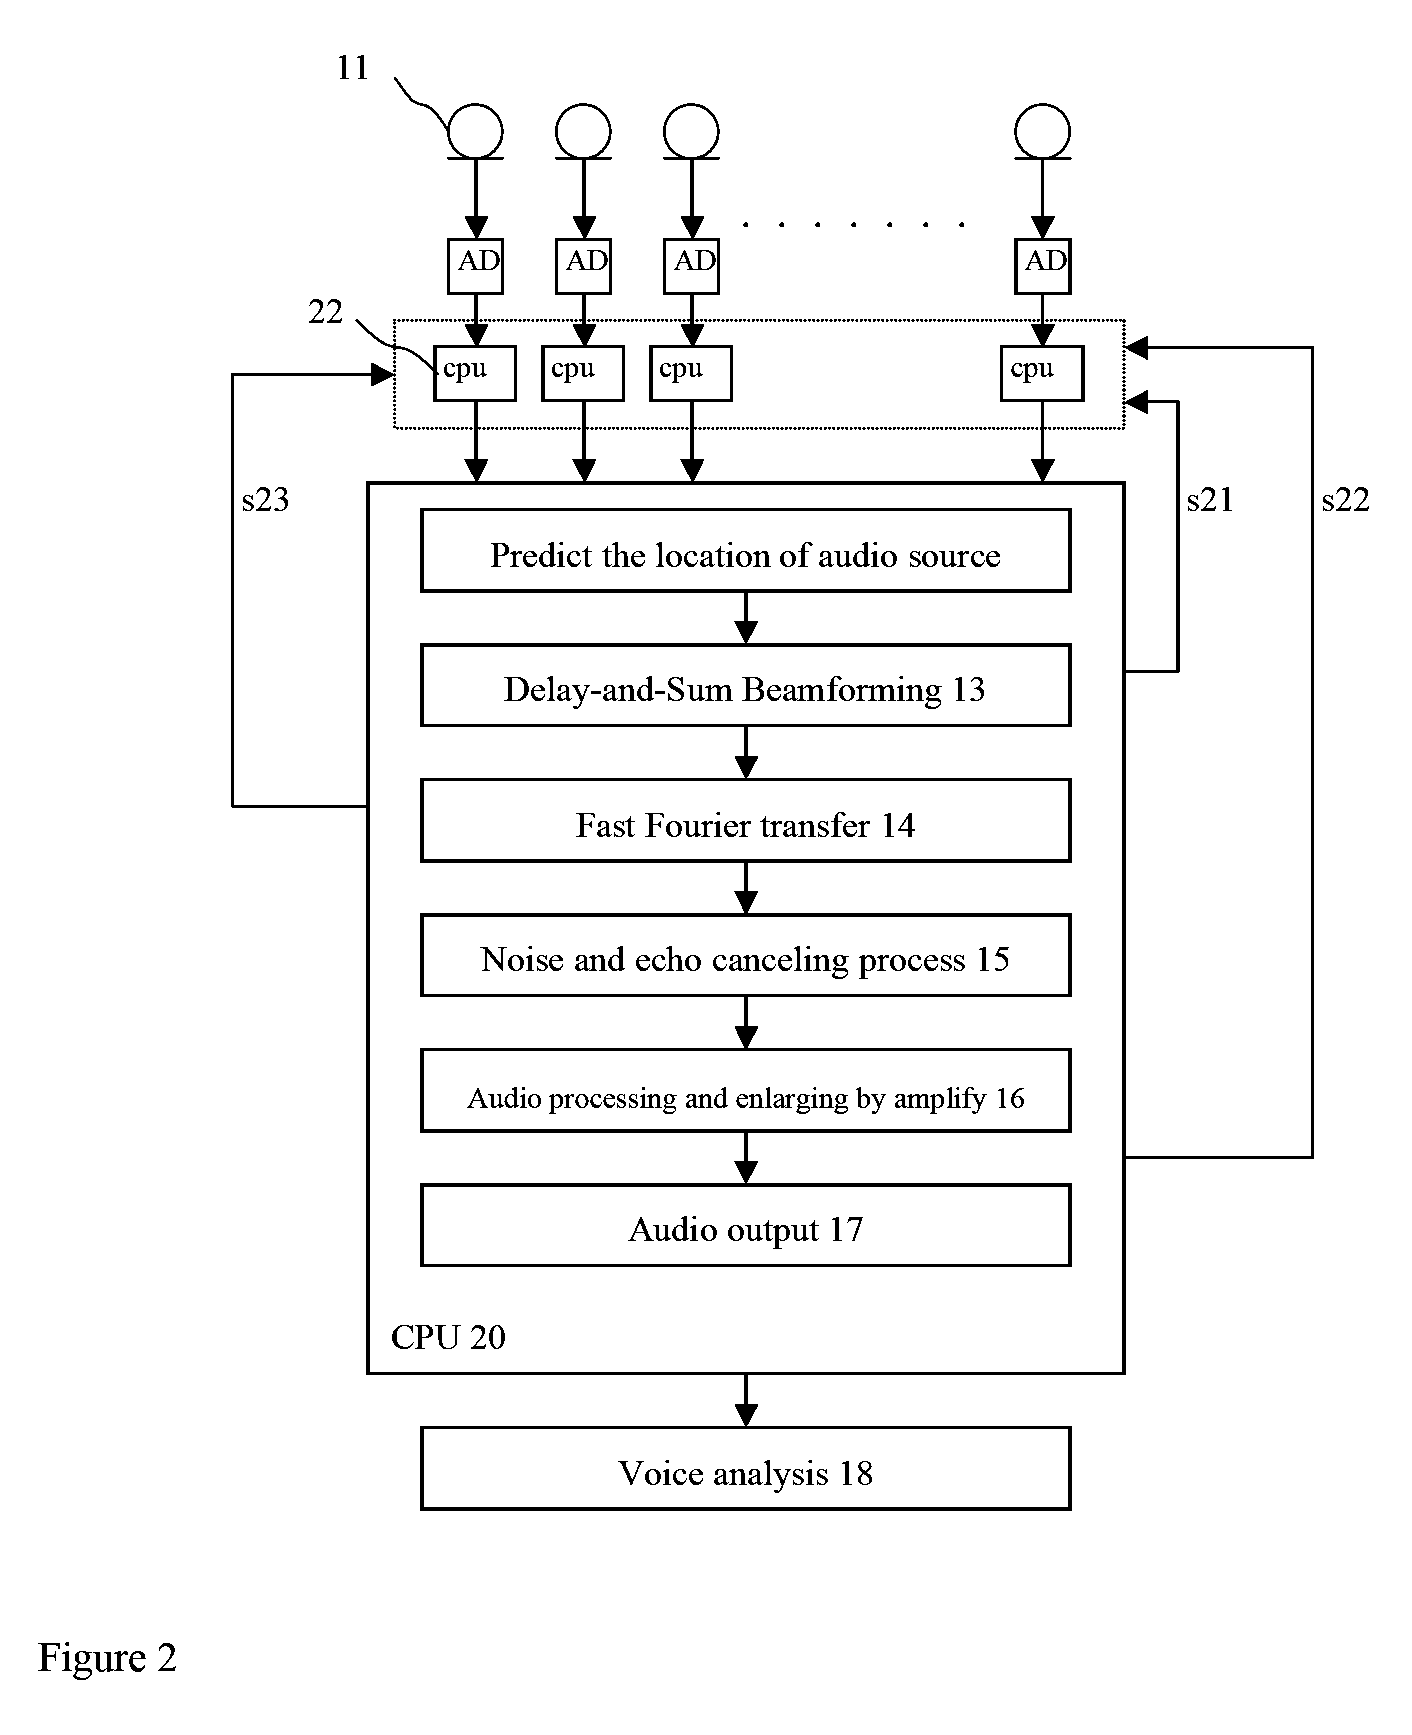 Audio collecting device by audio input matrix